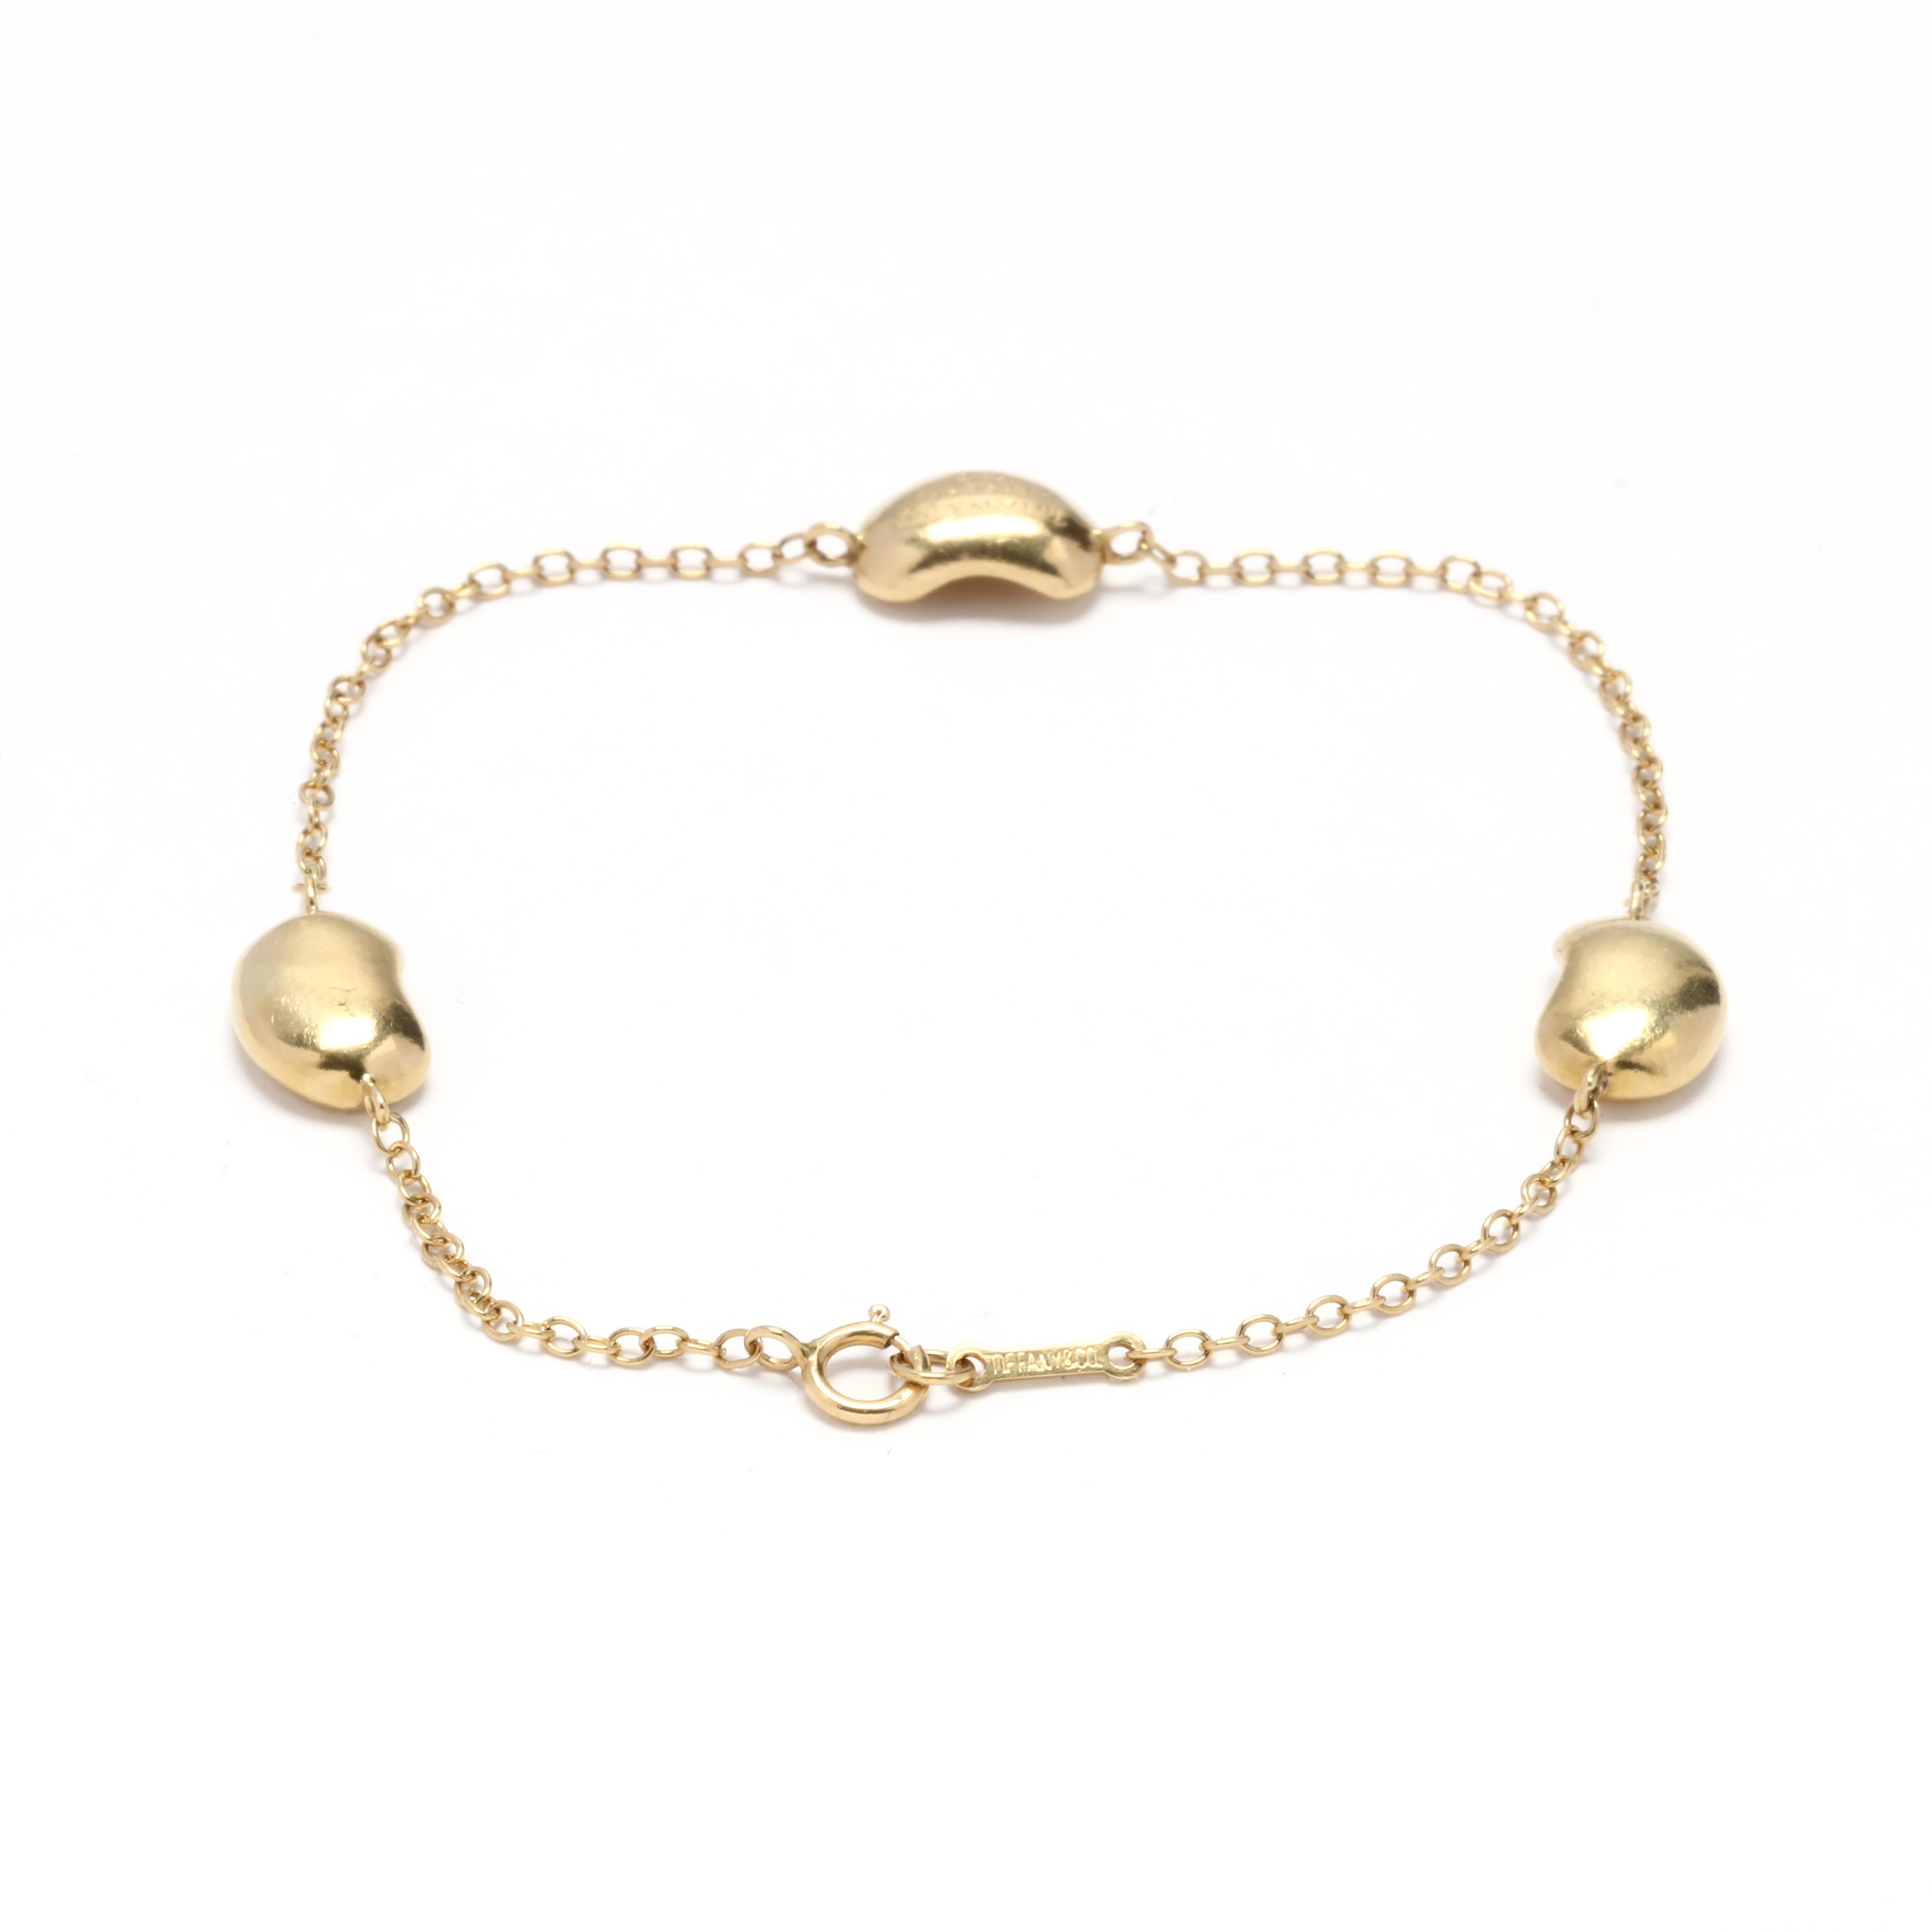 An 18 karat yellow gold three bean charm bracelet design by Elsa Peretti for Tiffany and Company. This bracelet features a thin cable chain with three bean motif charms throughout and a spring ring clasp.


Length: 7 in.

Width: 7.4 mm

Weight: 4.20